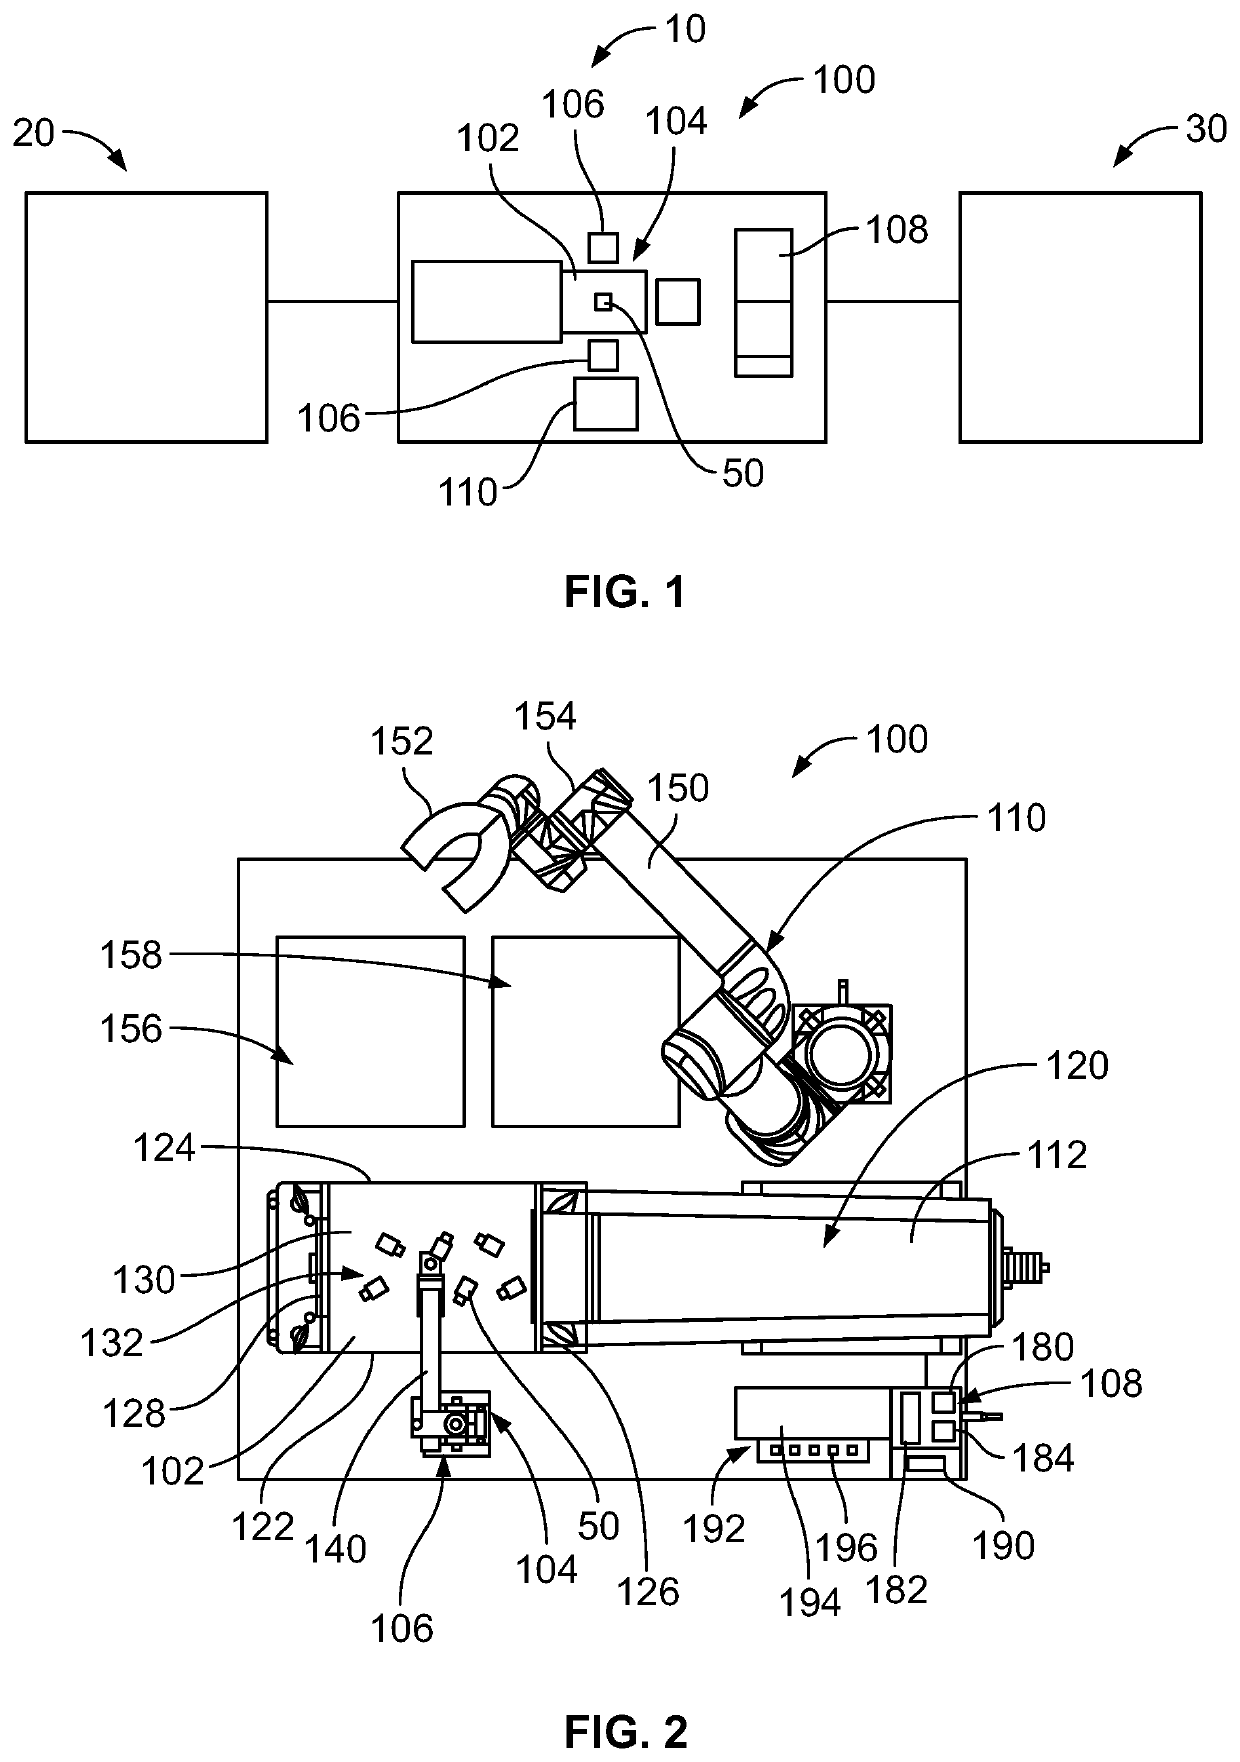 Vision inspection system and method of inspecting parts